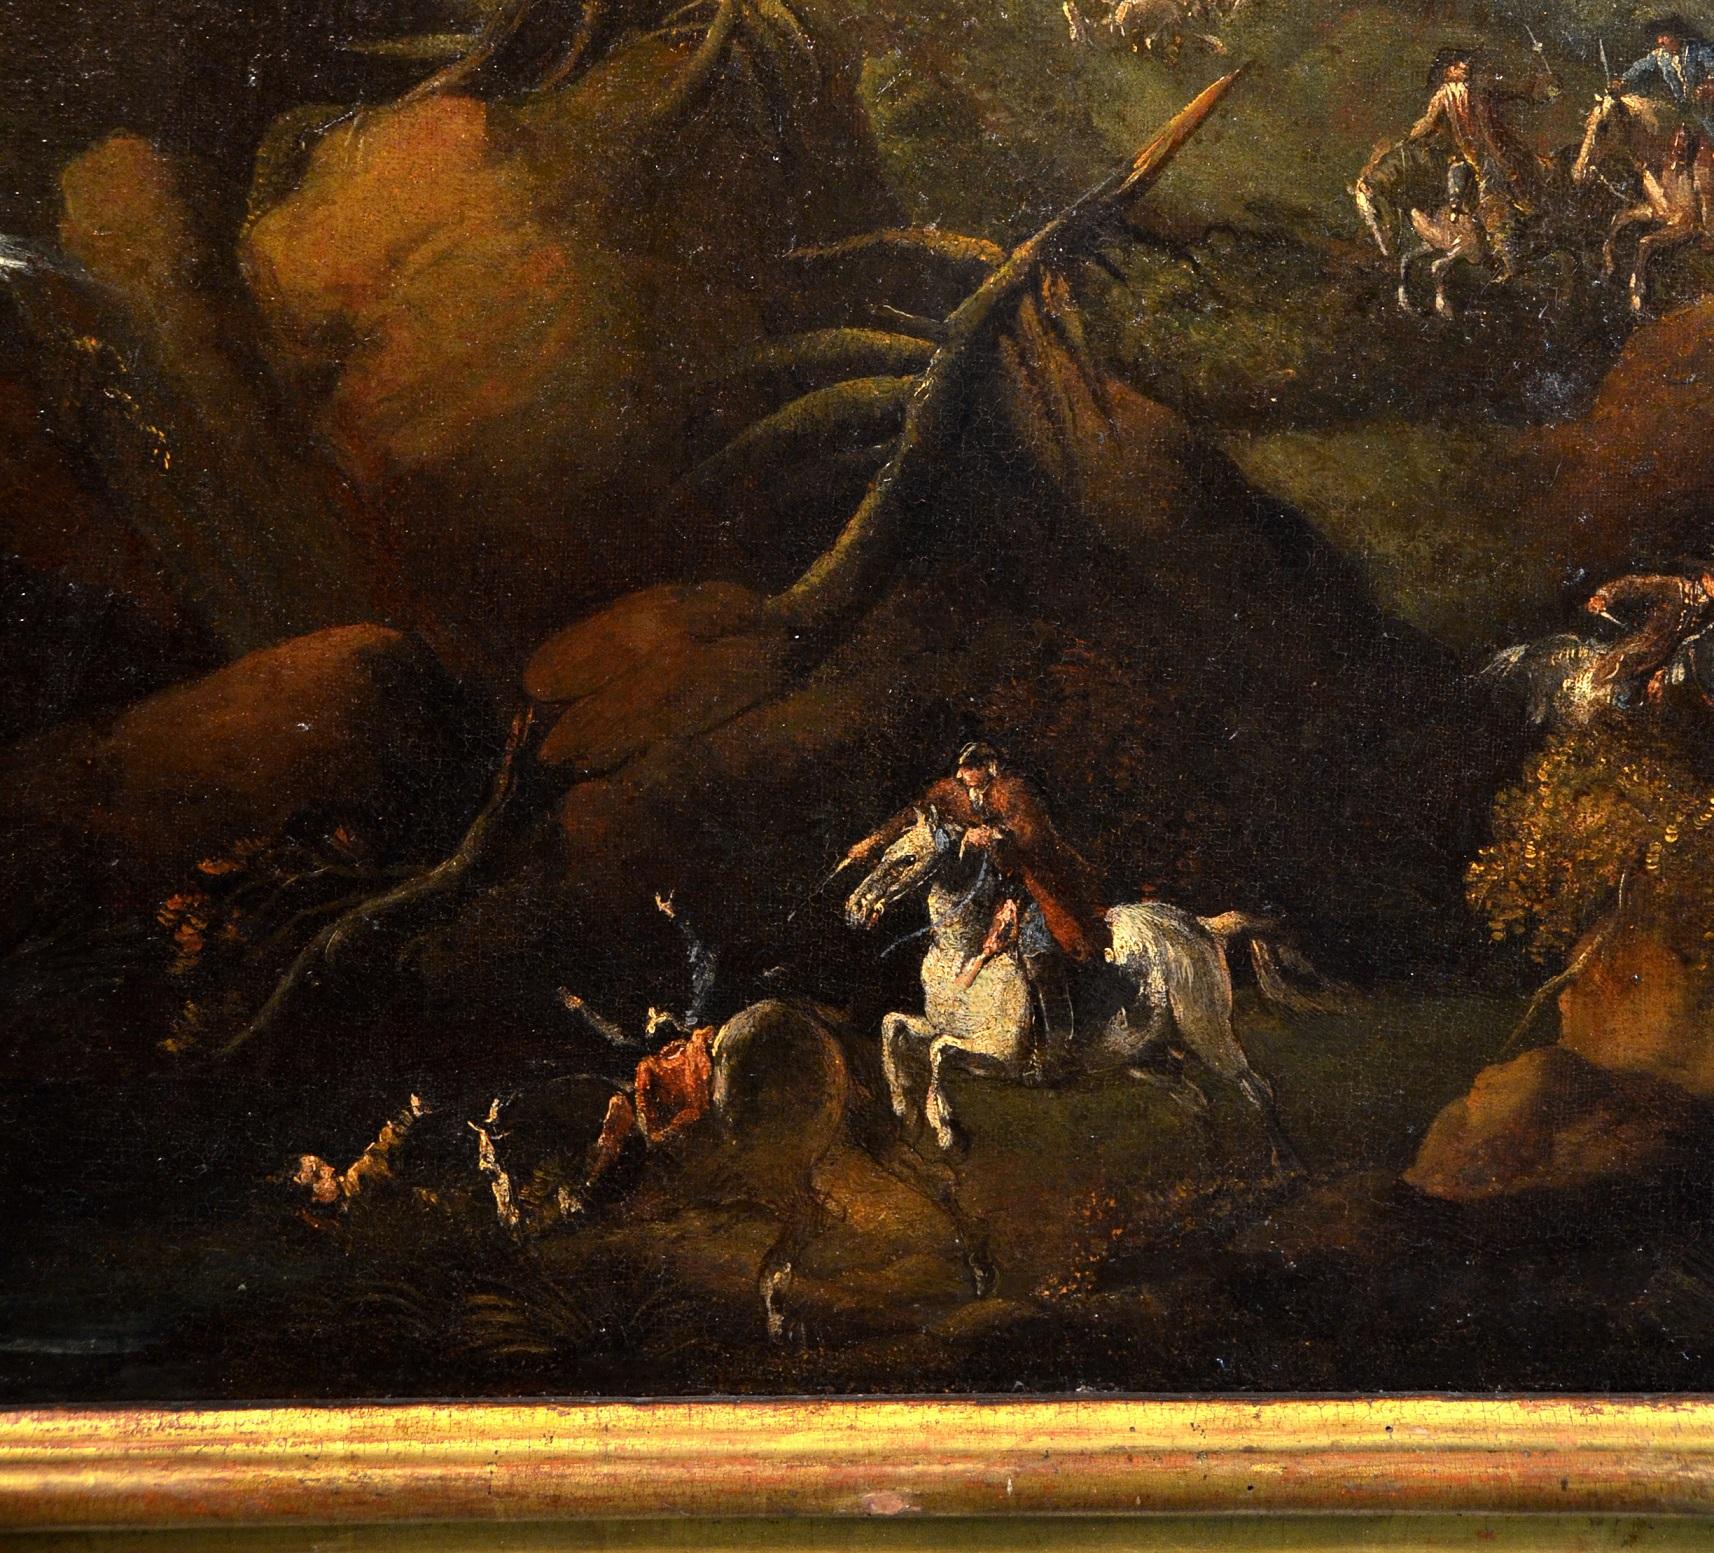 Coastal Landscape Horses Paint 17th Century Oil on canvas Forest Old master Art - Brown Landscape Painting by Pandolfo Reschi known as Monsù Pandolfo (Danzica 1643 - Florence 1699), attributable